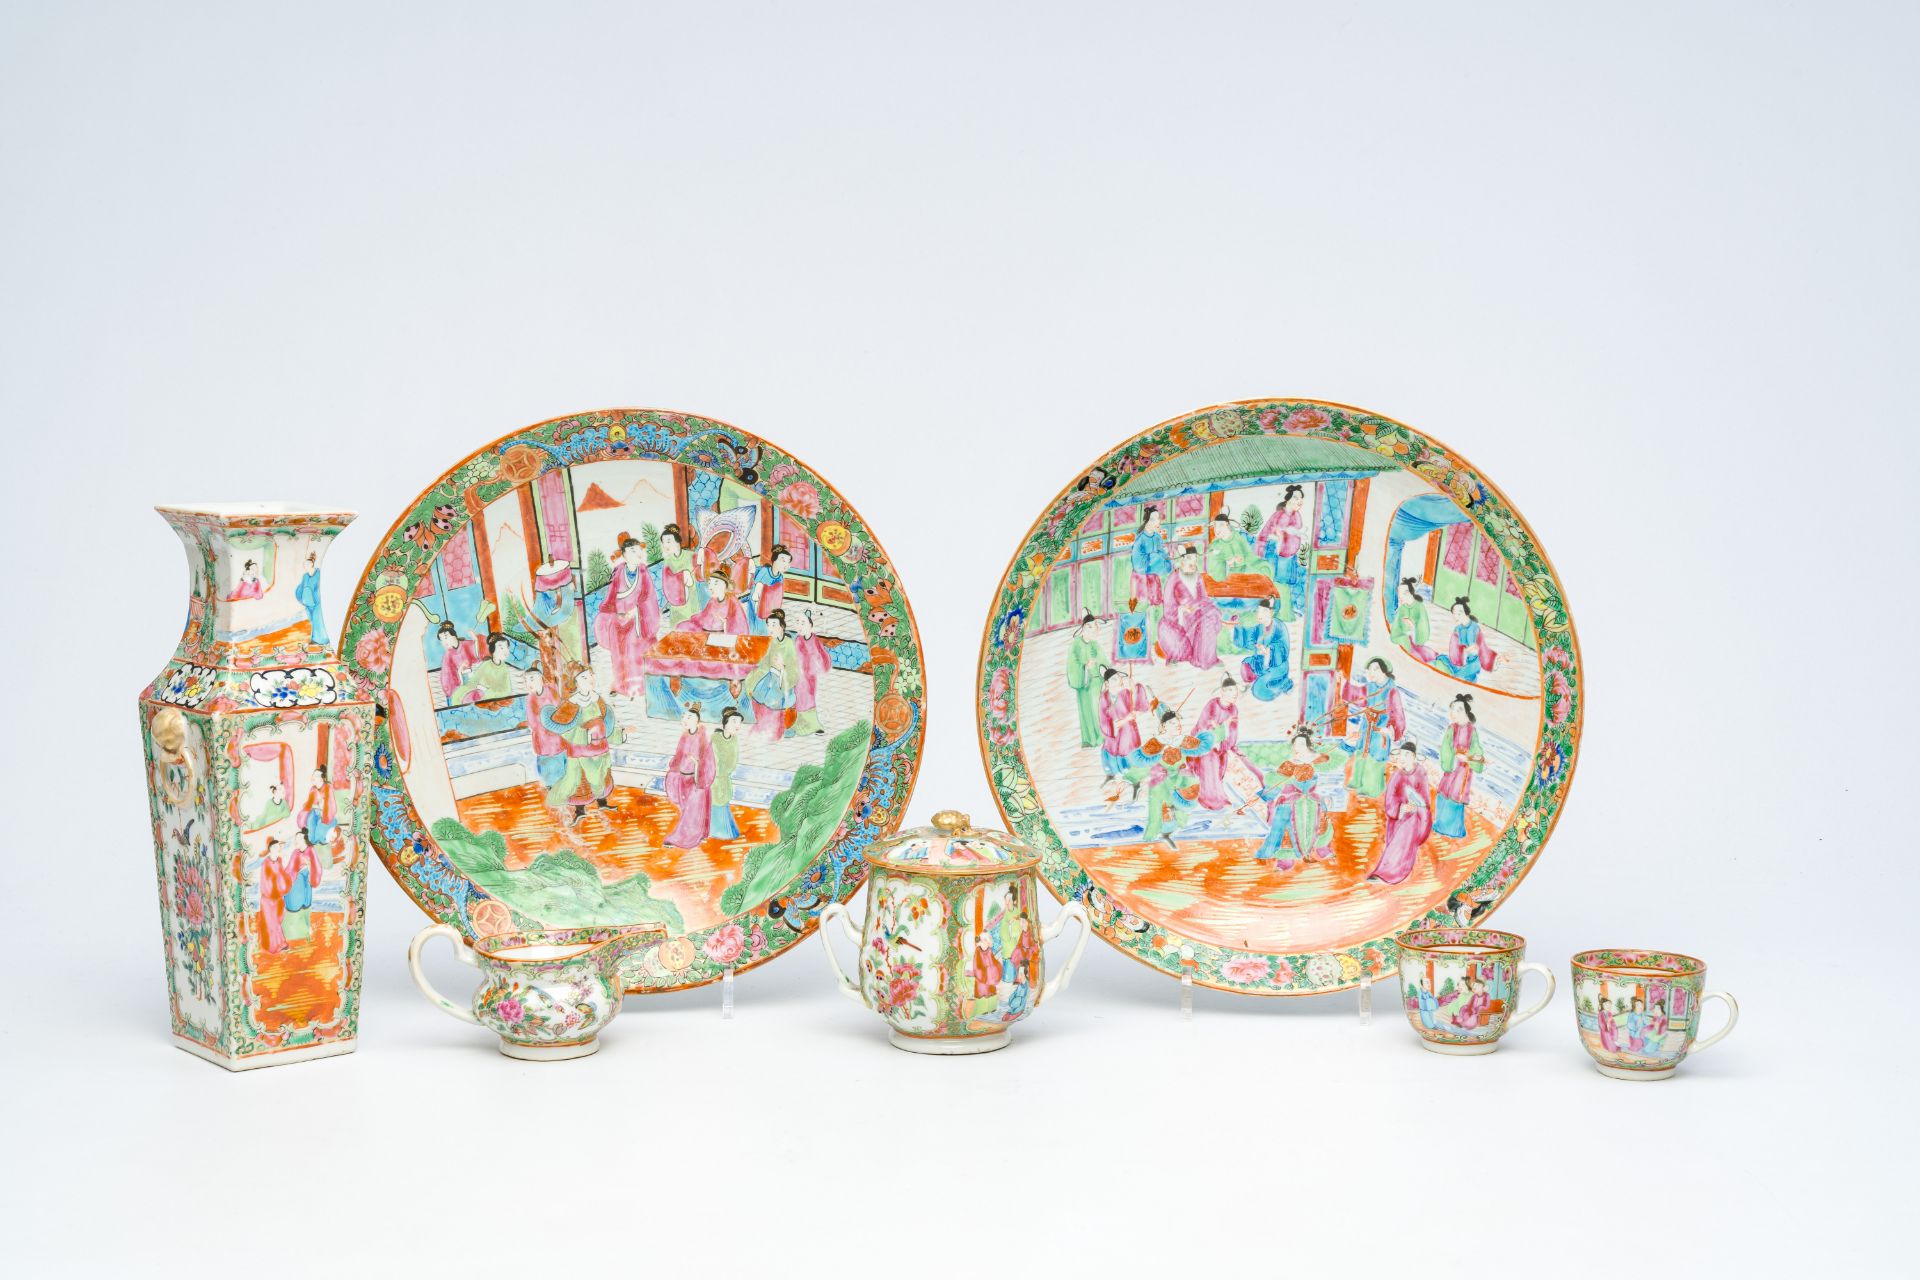 A varied collection of Chinese Canton famille rose porcelain with palace scenes and floral design, 1